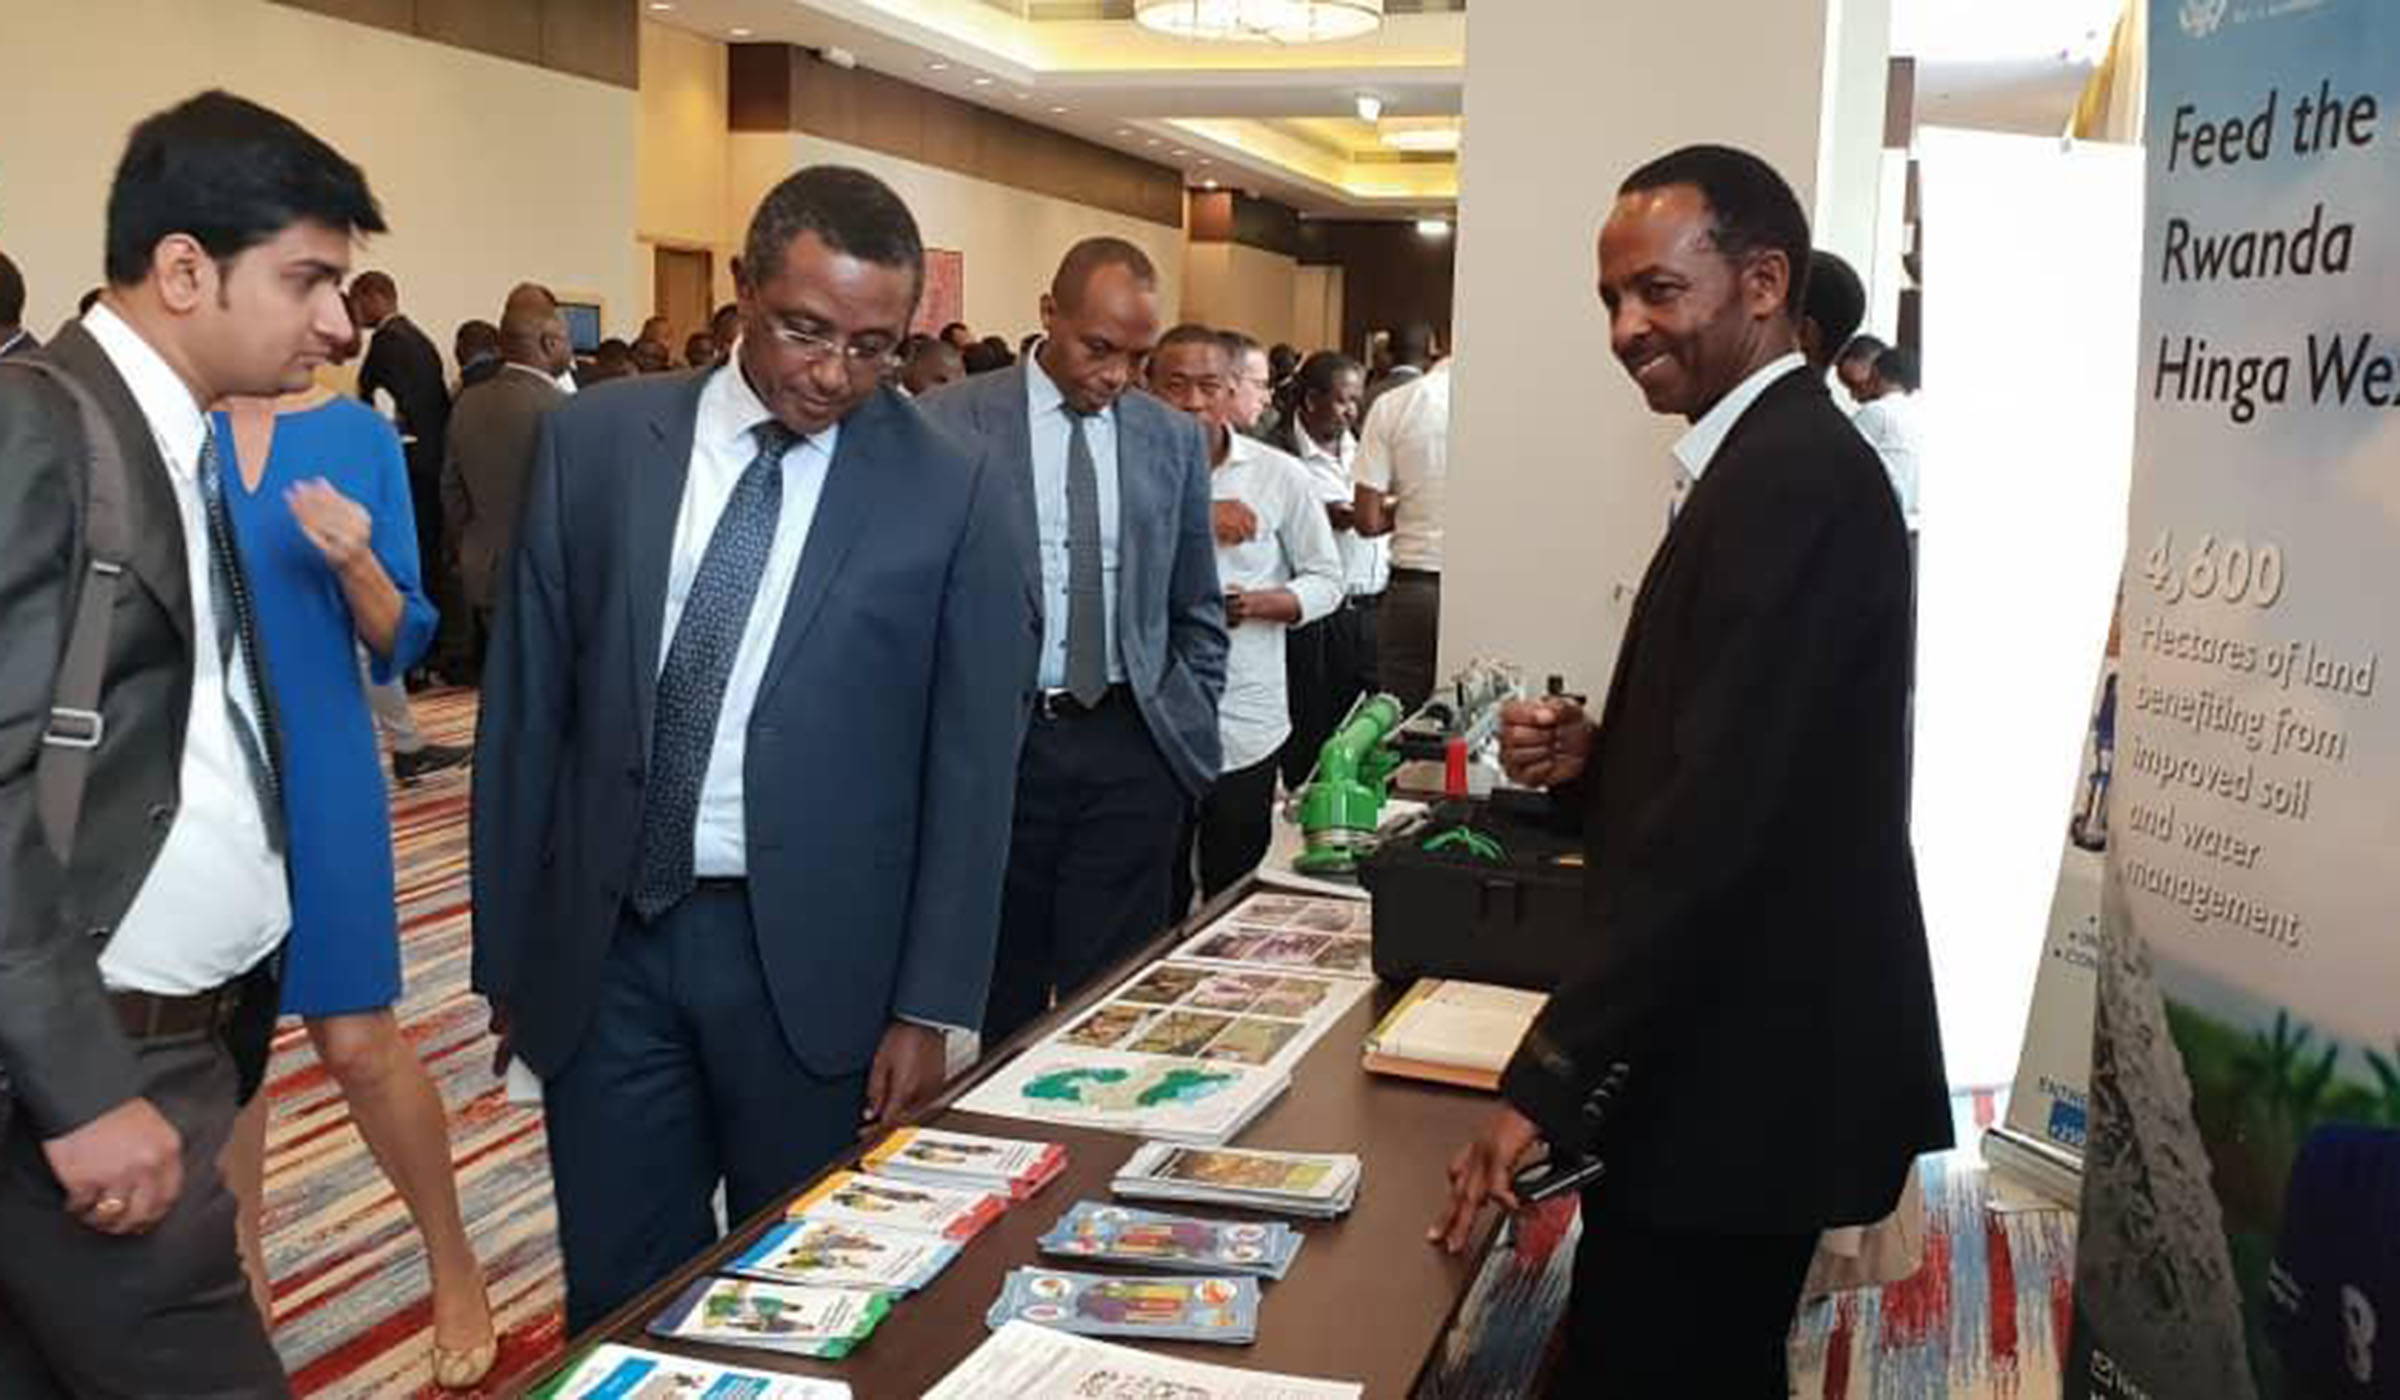 Environment minister Biruta (centre) at one the stands at the opening of the two-day Integrated Water Resources Management Conference in Kigali yesterday. Courtesy.